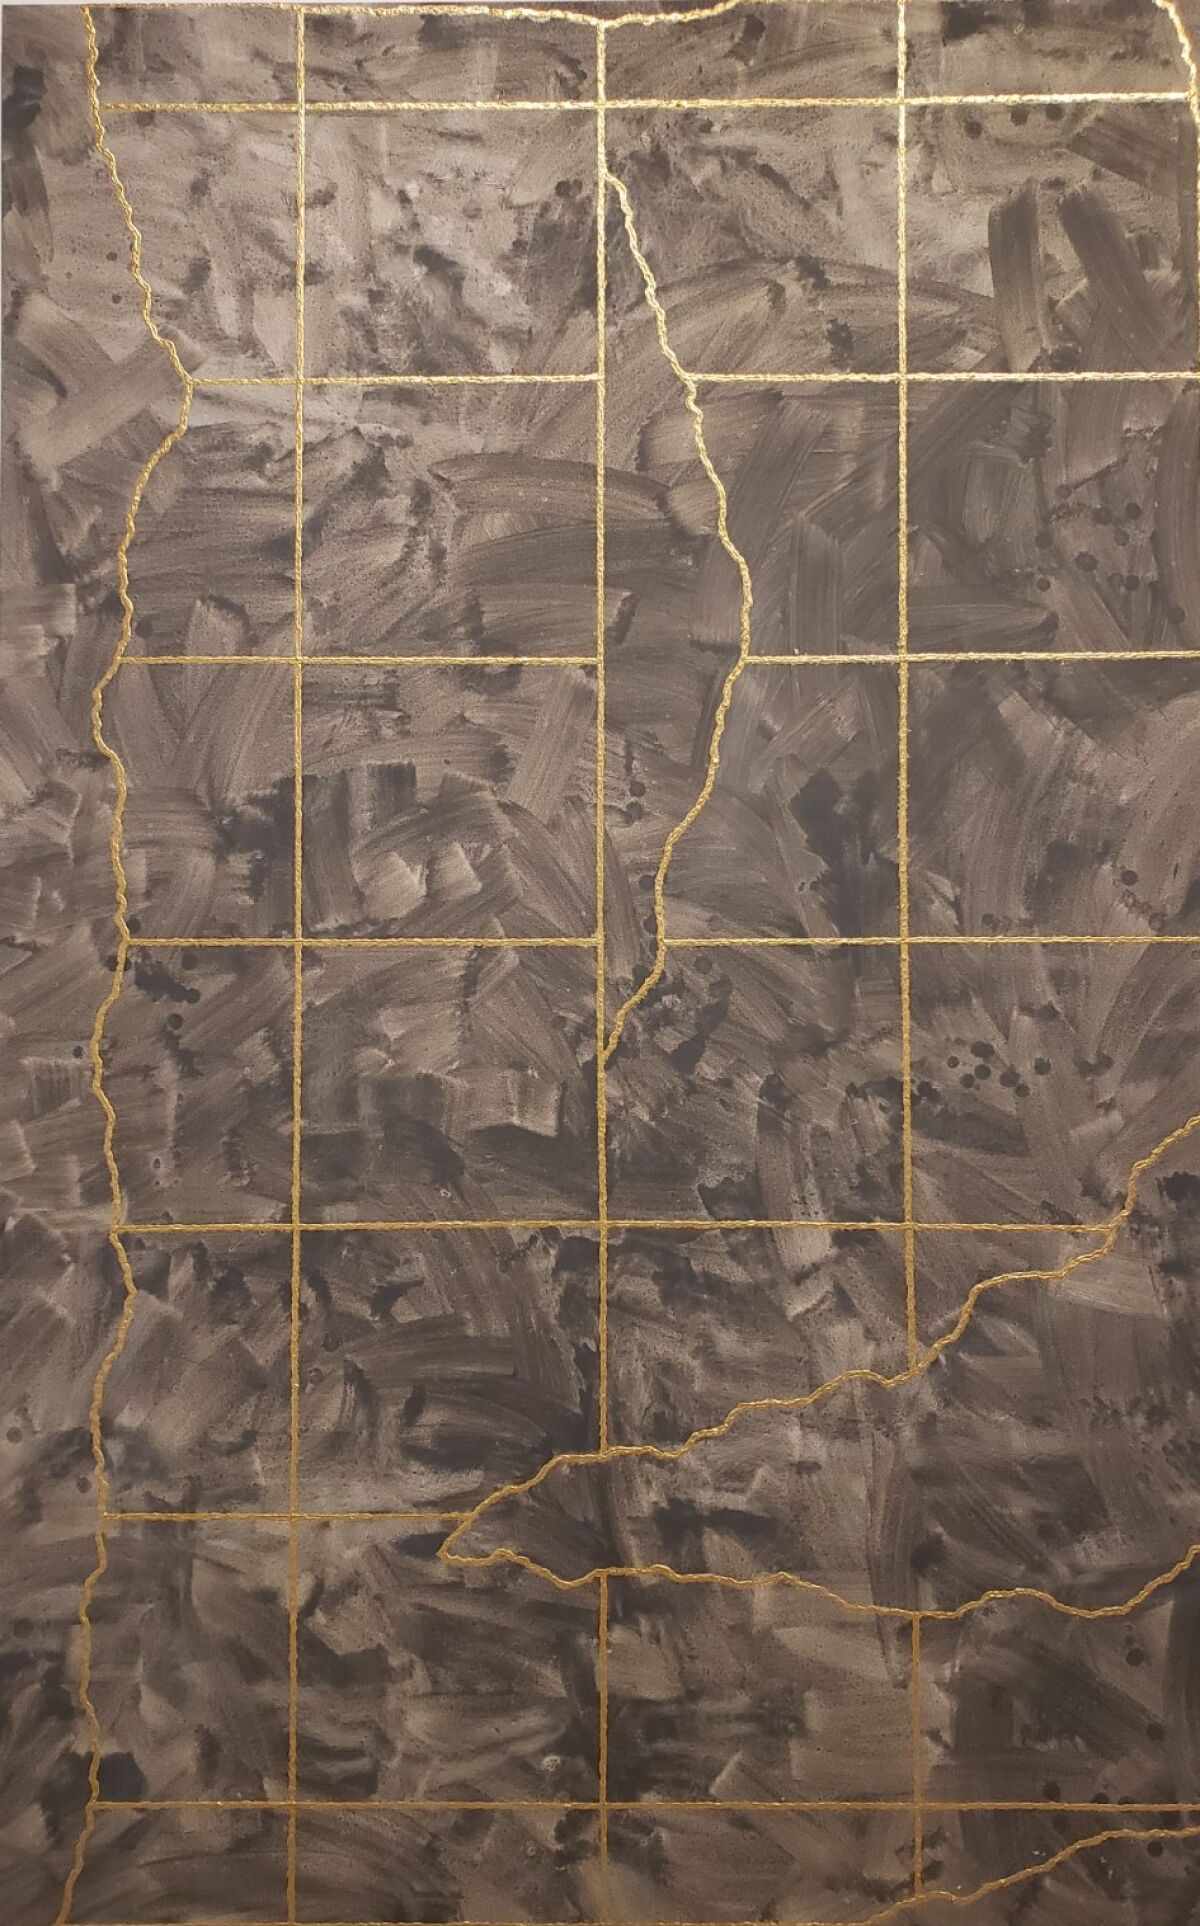 Rebecca Morris, "Untitled (#19-20)," 2020; oil and spray paint on canvas is straight and crooked lines on brown brushstrokes